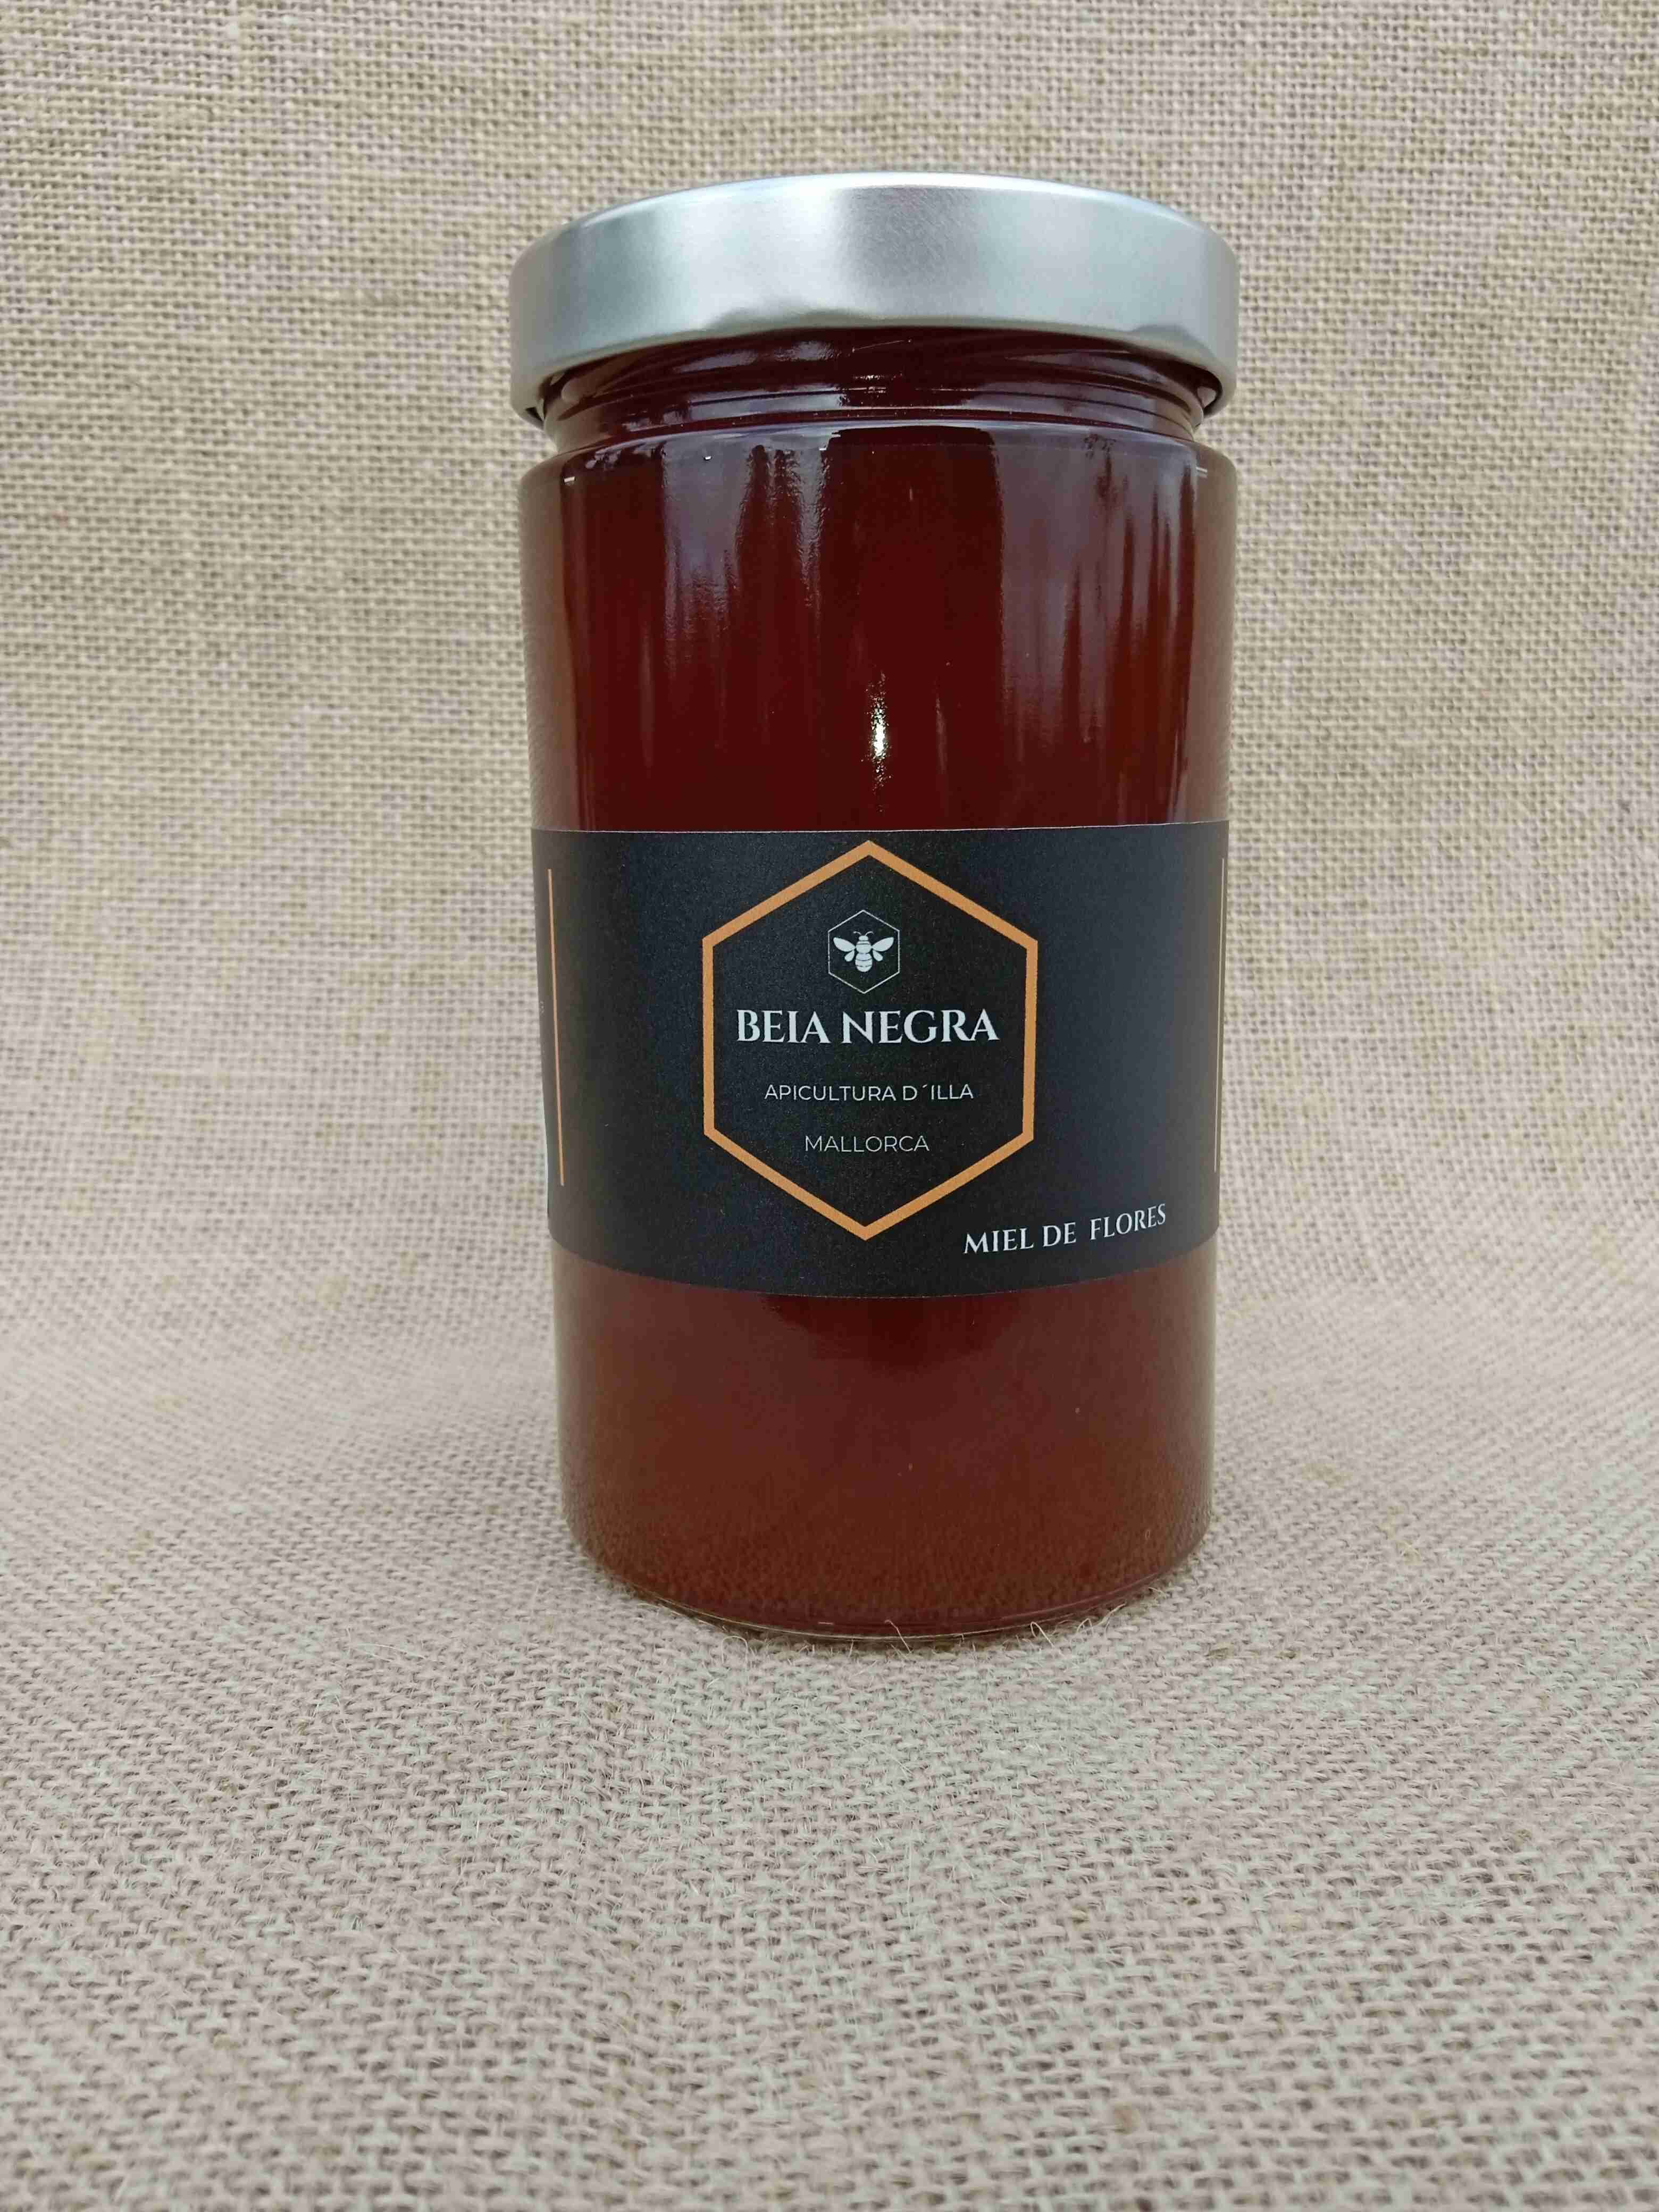 Image with Multifloral honey in the Tramuntana area